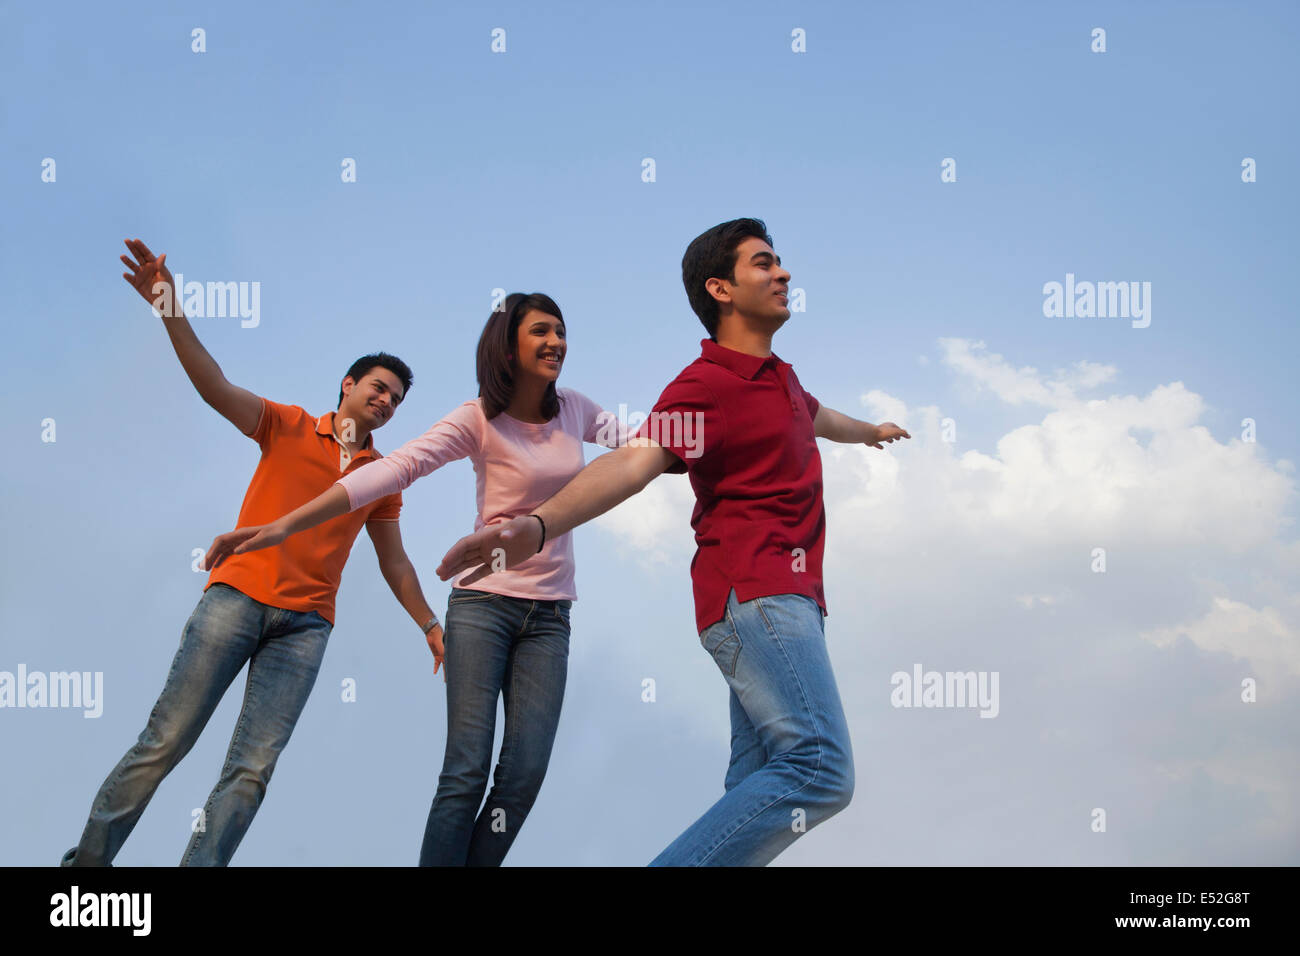 Low angle view of happy friends with arms outstretched against blue sky Stock Photo